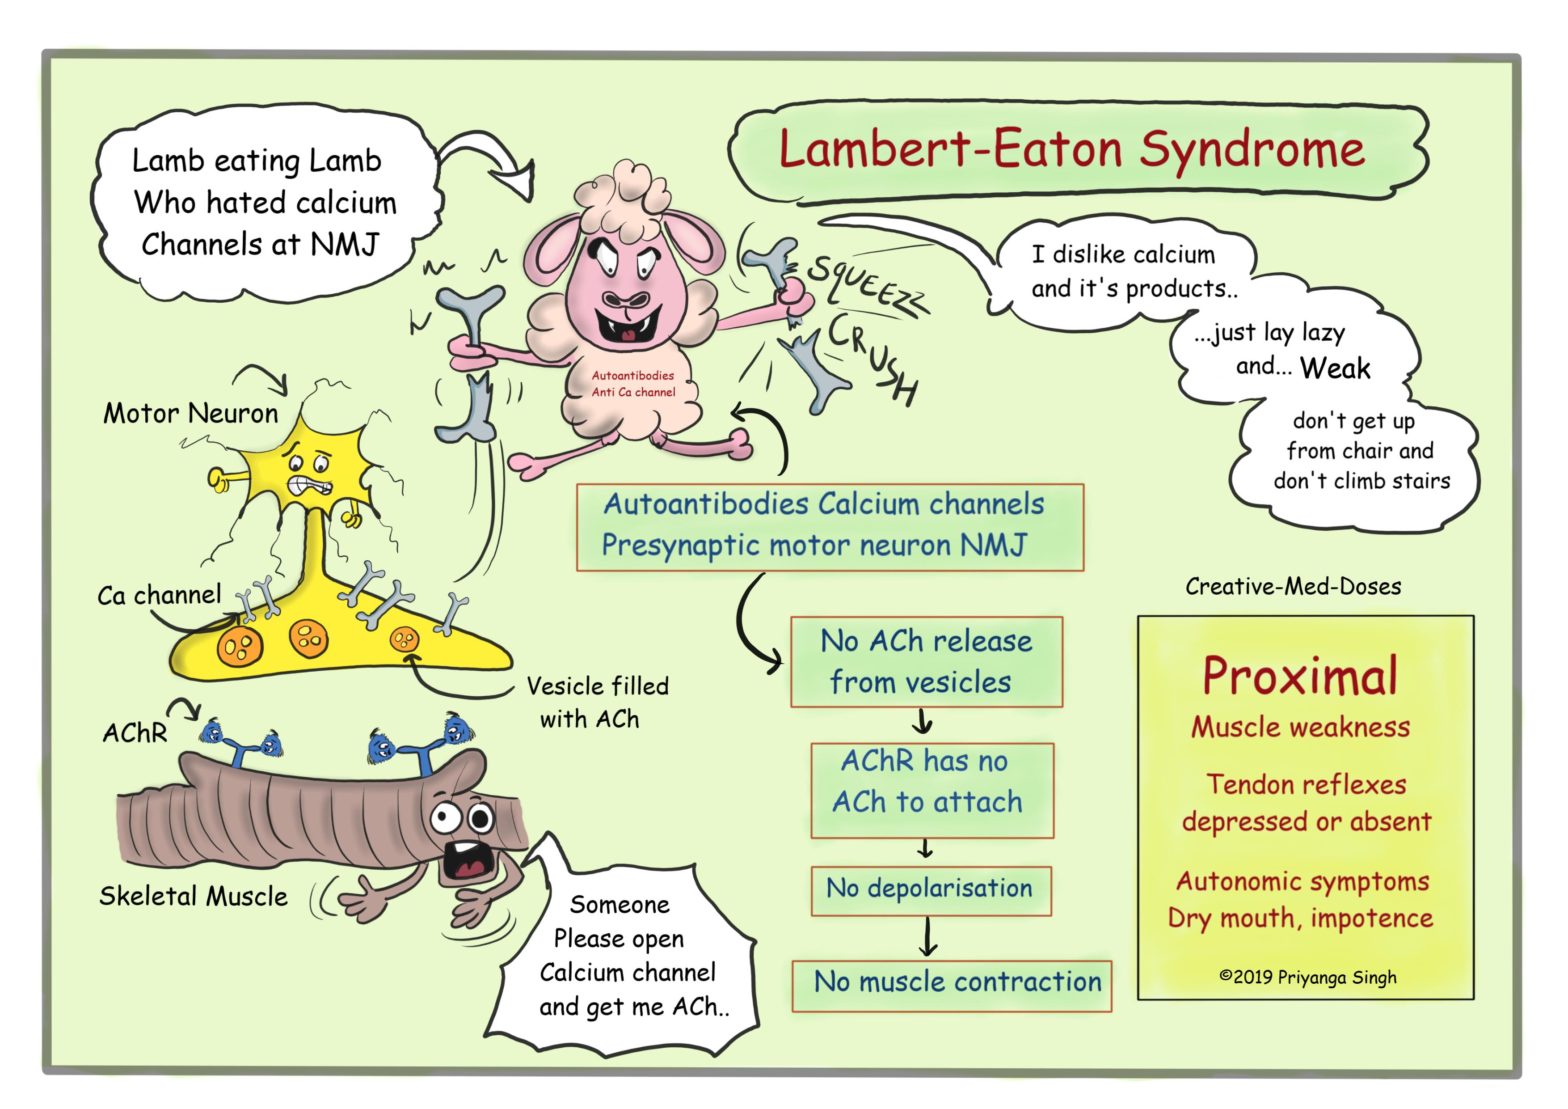 Lambert Eaton Syndrome: Clinical features and treatment